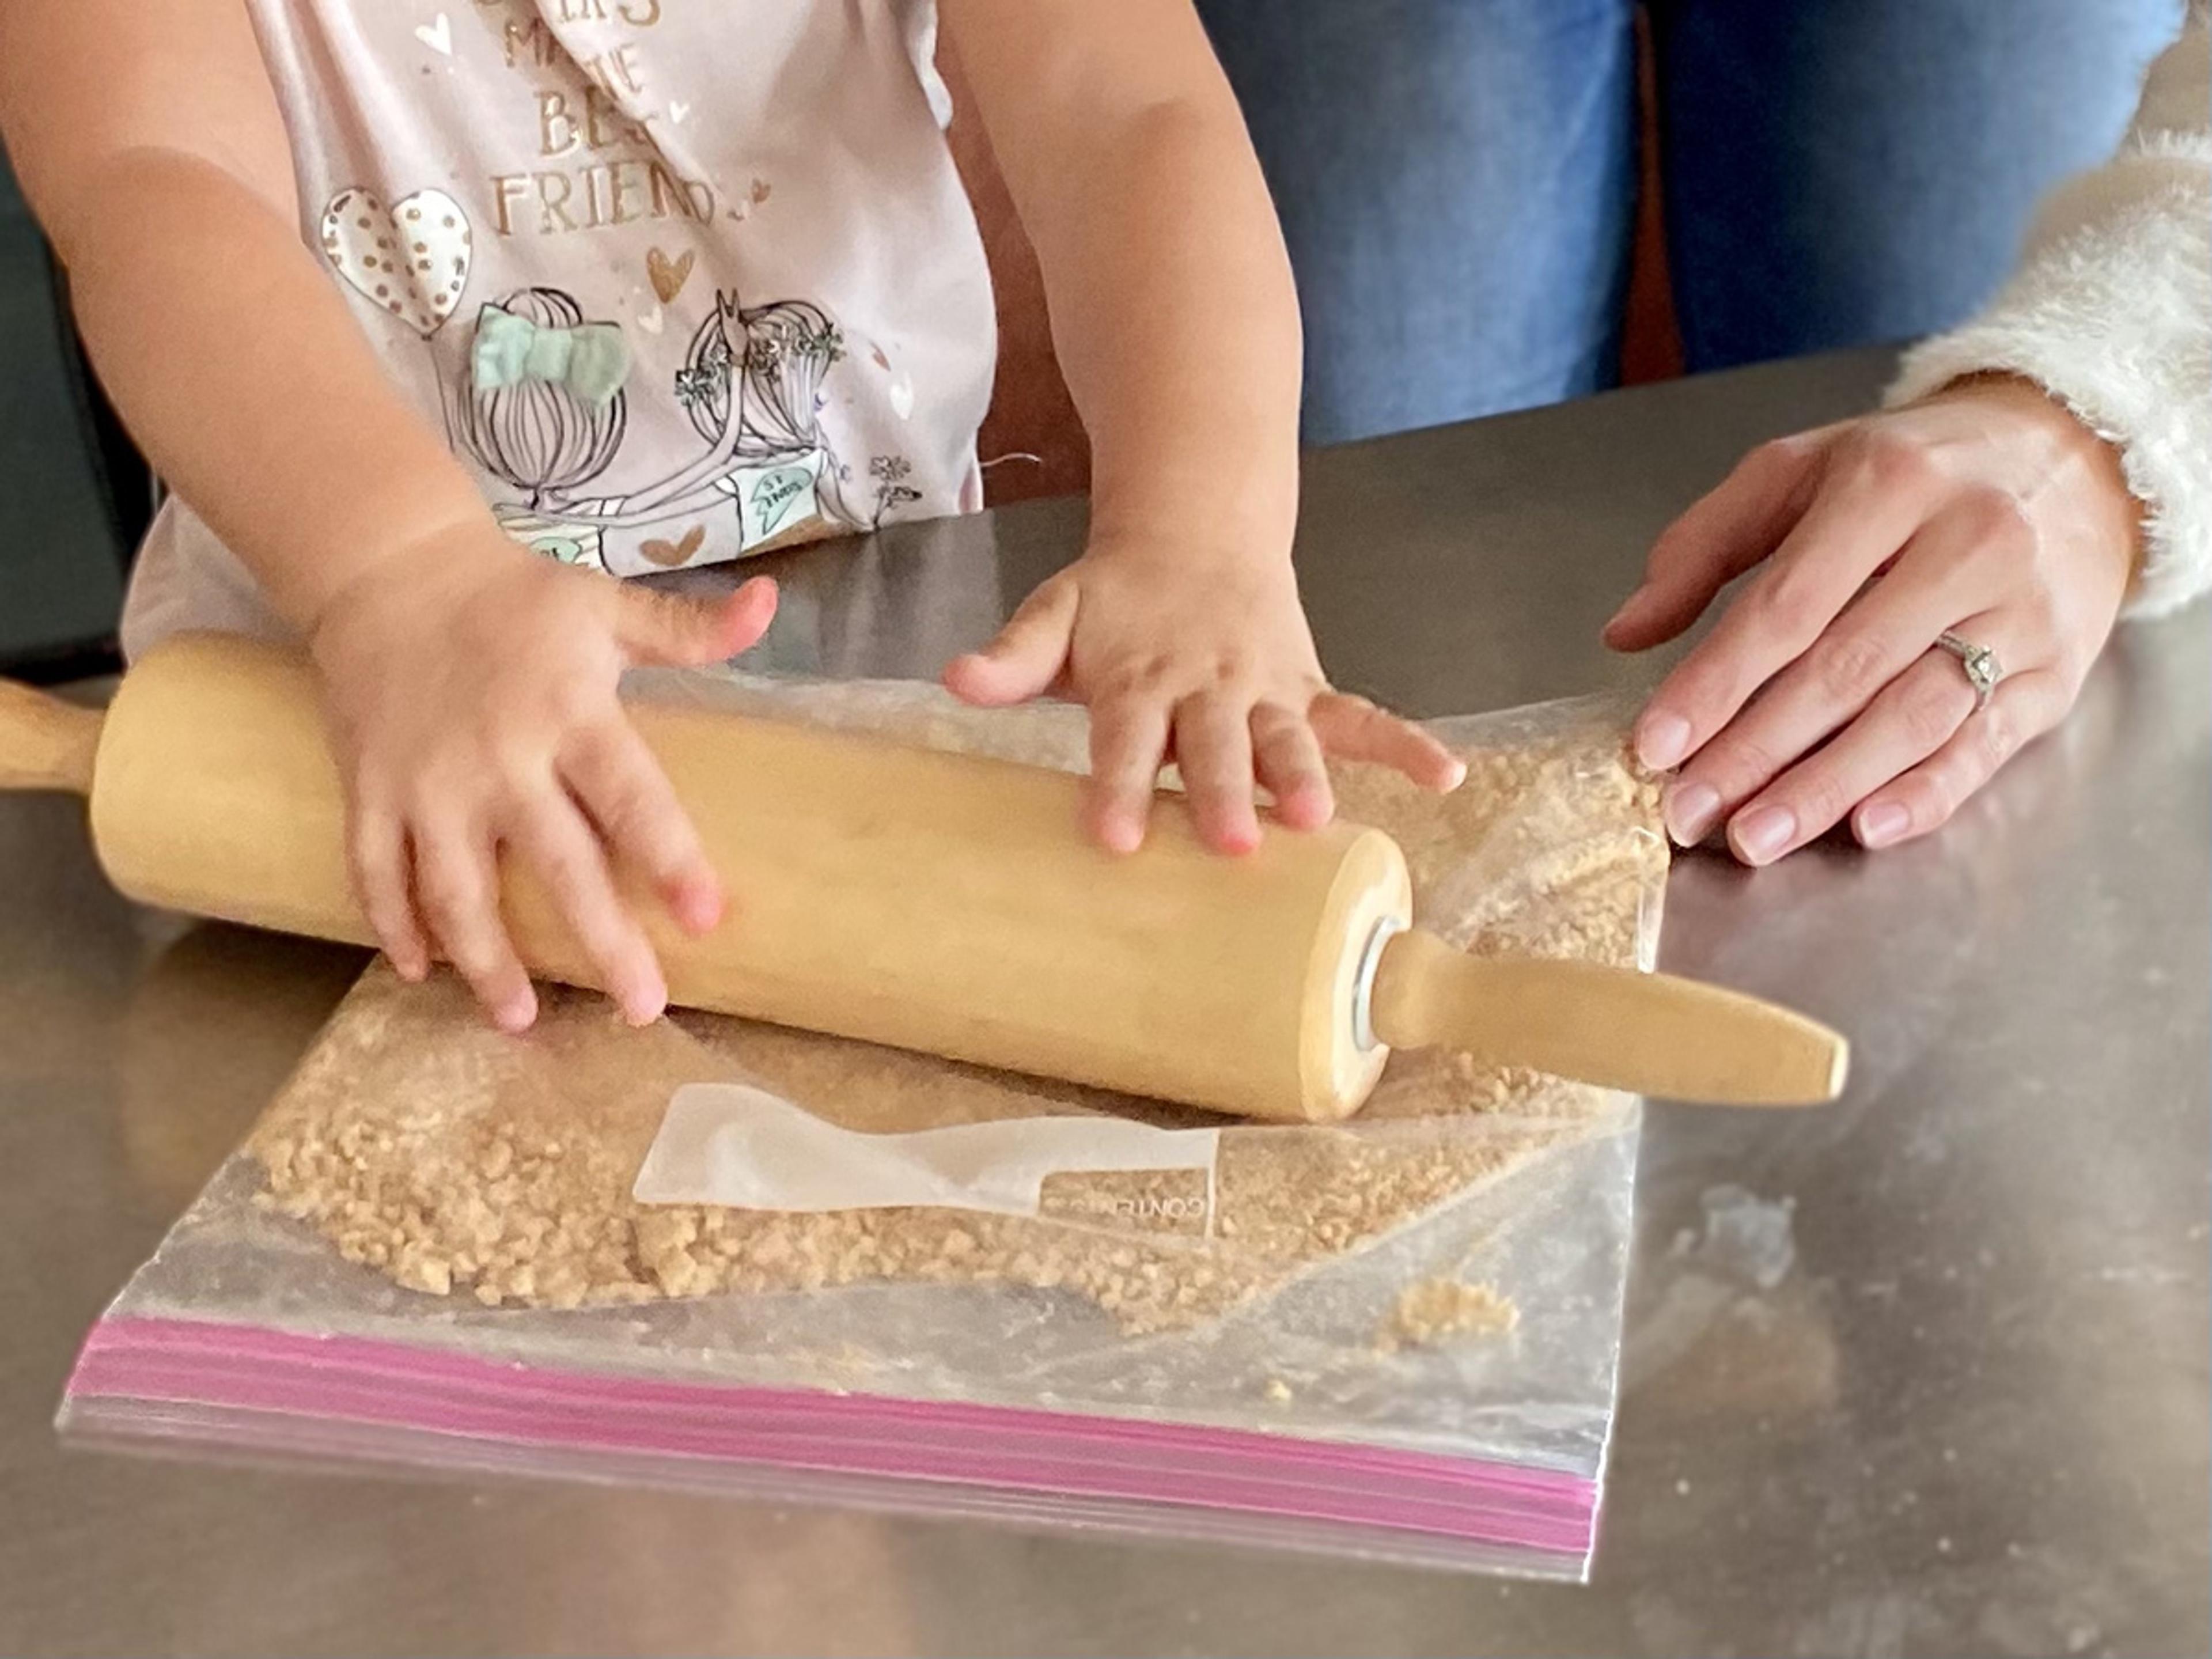 View of a little girl's hands using a rolling pin to smash crackers in a plastic bag.